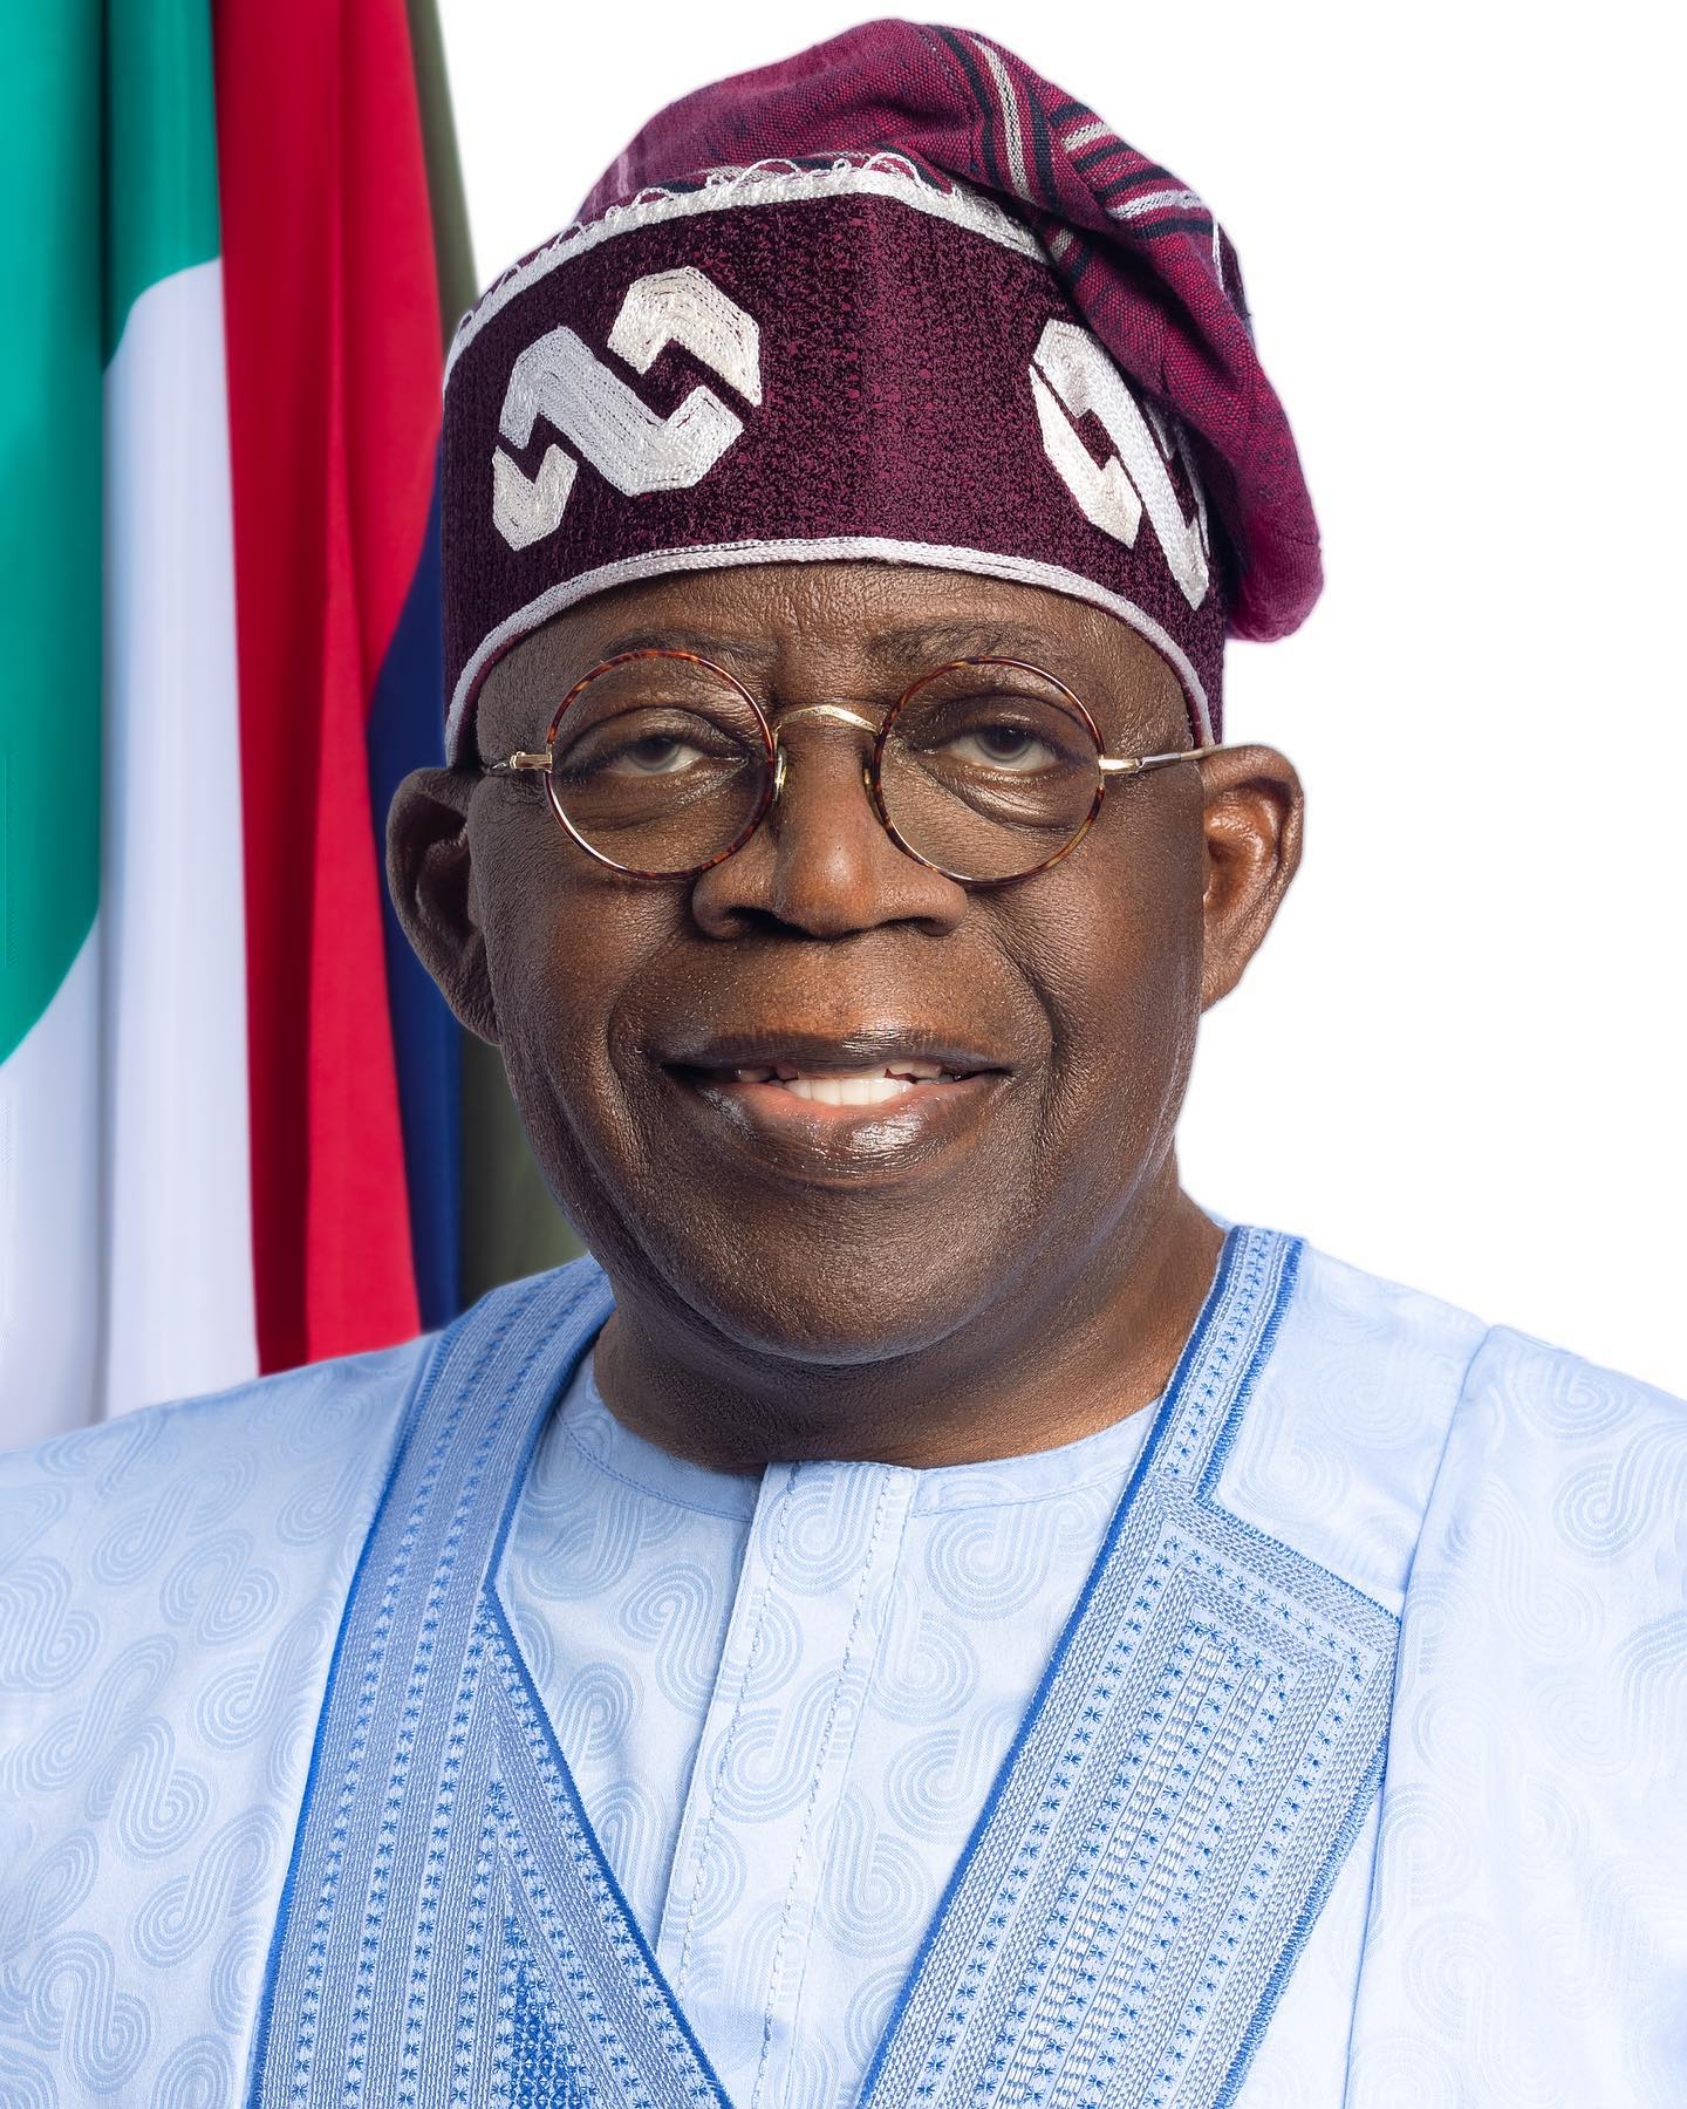 JUST IN: President Tinubu holds closed door meeting with NSA Chairman, New Service Chiefs at Aso Rock